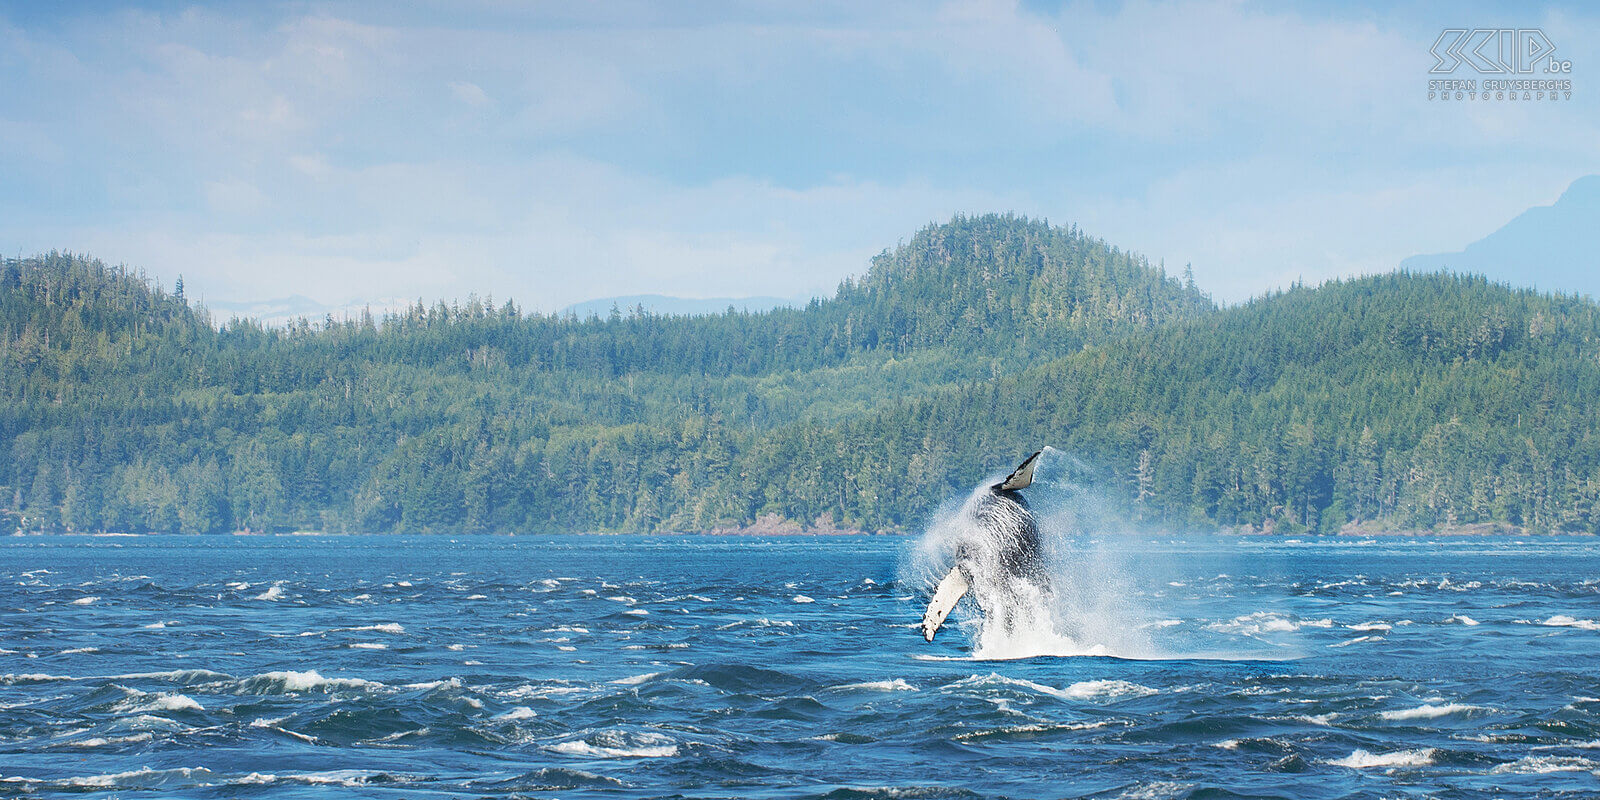 Telegraph Cove - Breaching humpback whale A humback whale breaching in the waters of the Johnstone Strait near Vancouver Island. Whales probably breach when they are in groups for social reasons such as showing dominance, courting or warning for danger. <br />
 Stefan Cruysberghs